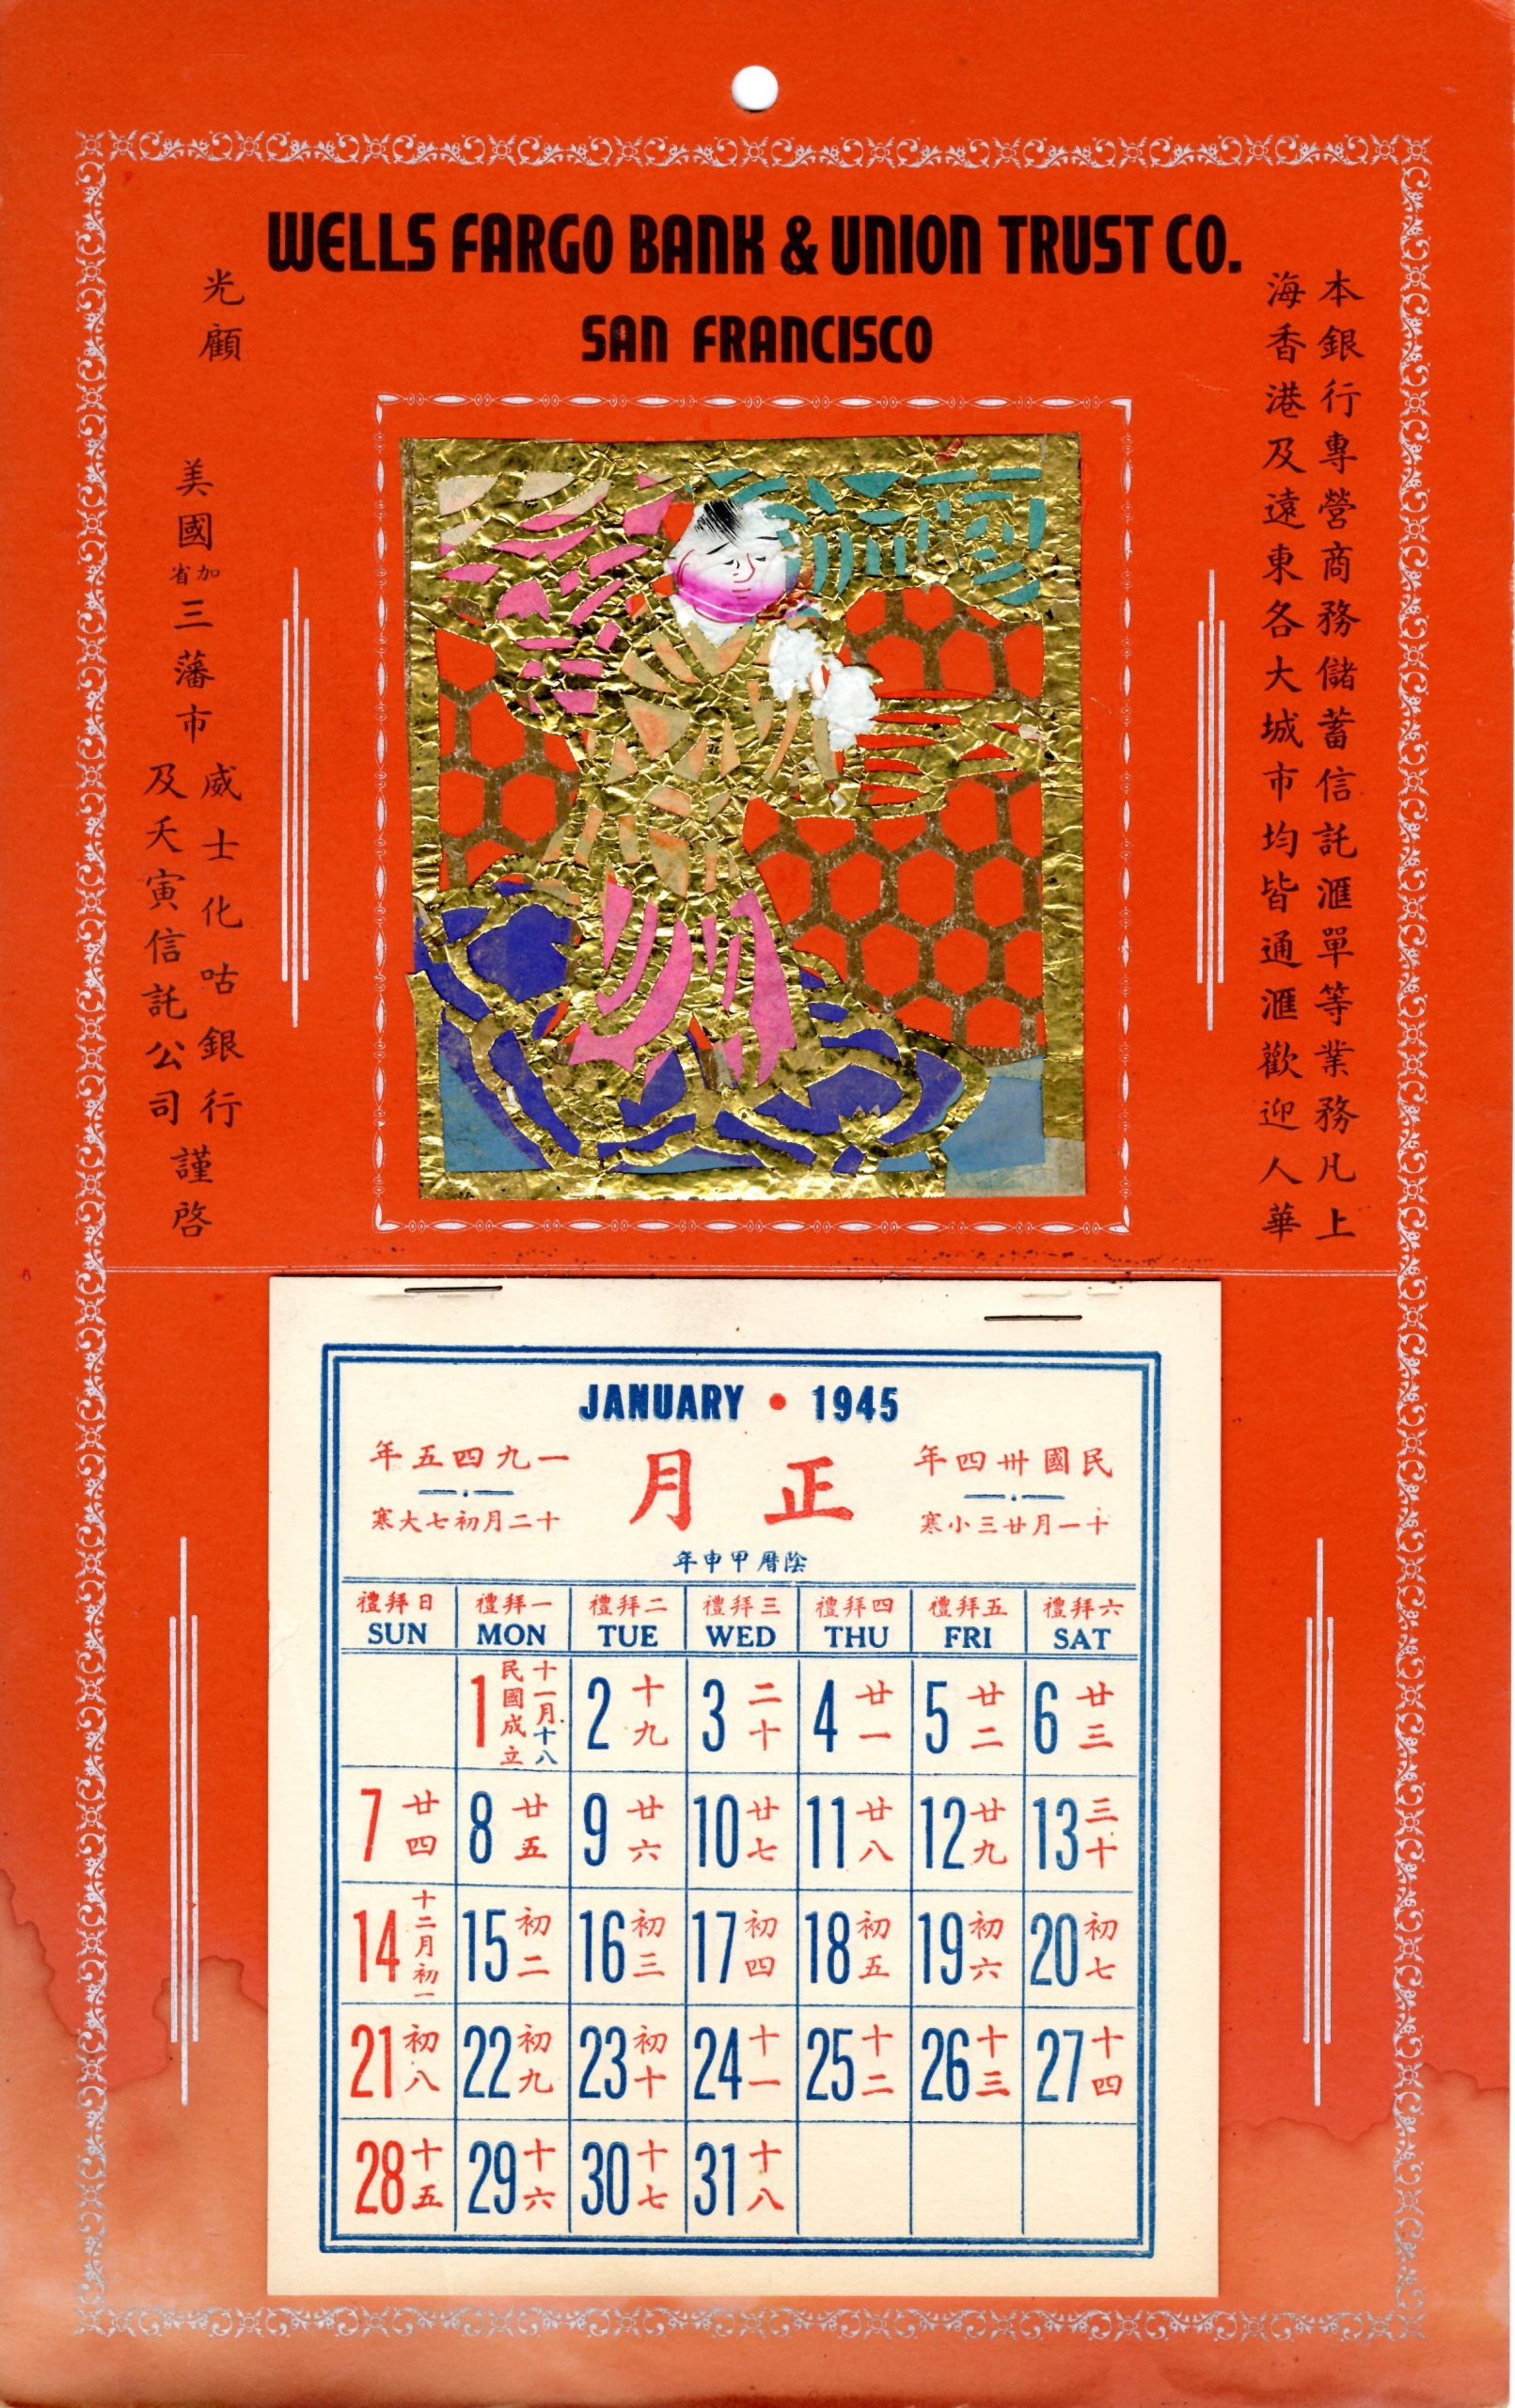 Calendar dated 1945. Colorful illustration with gold embellishments of a person. Calendar has solar dates marked in numeric print and lunar days marked in red.